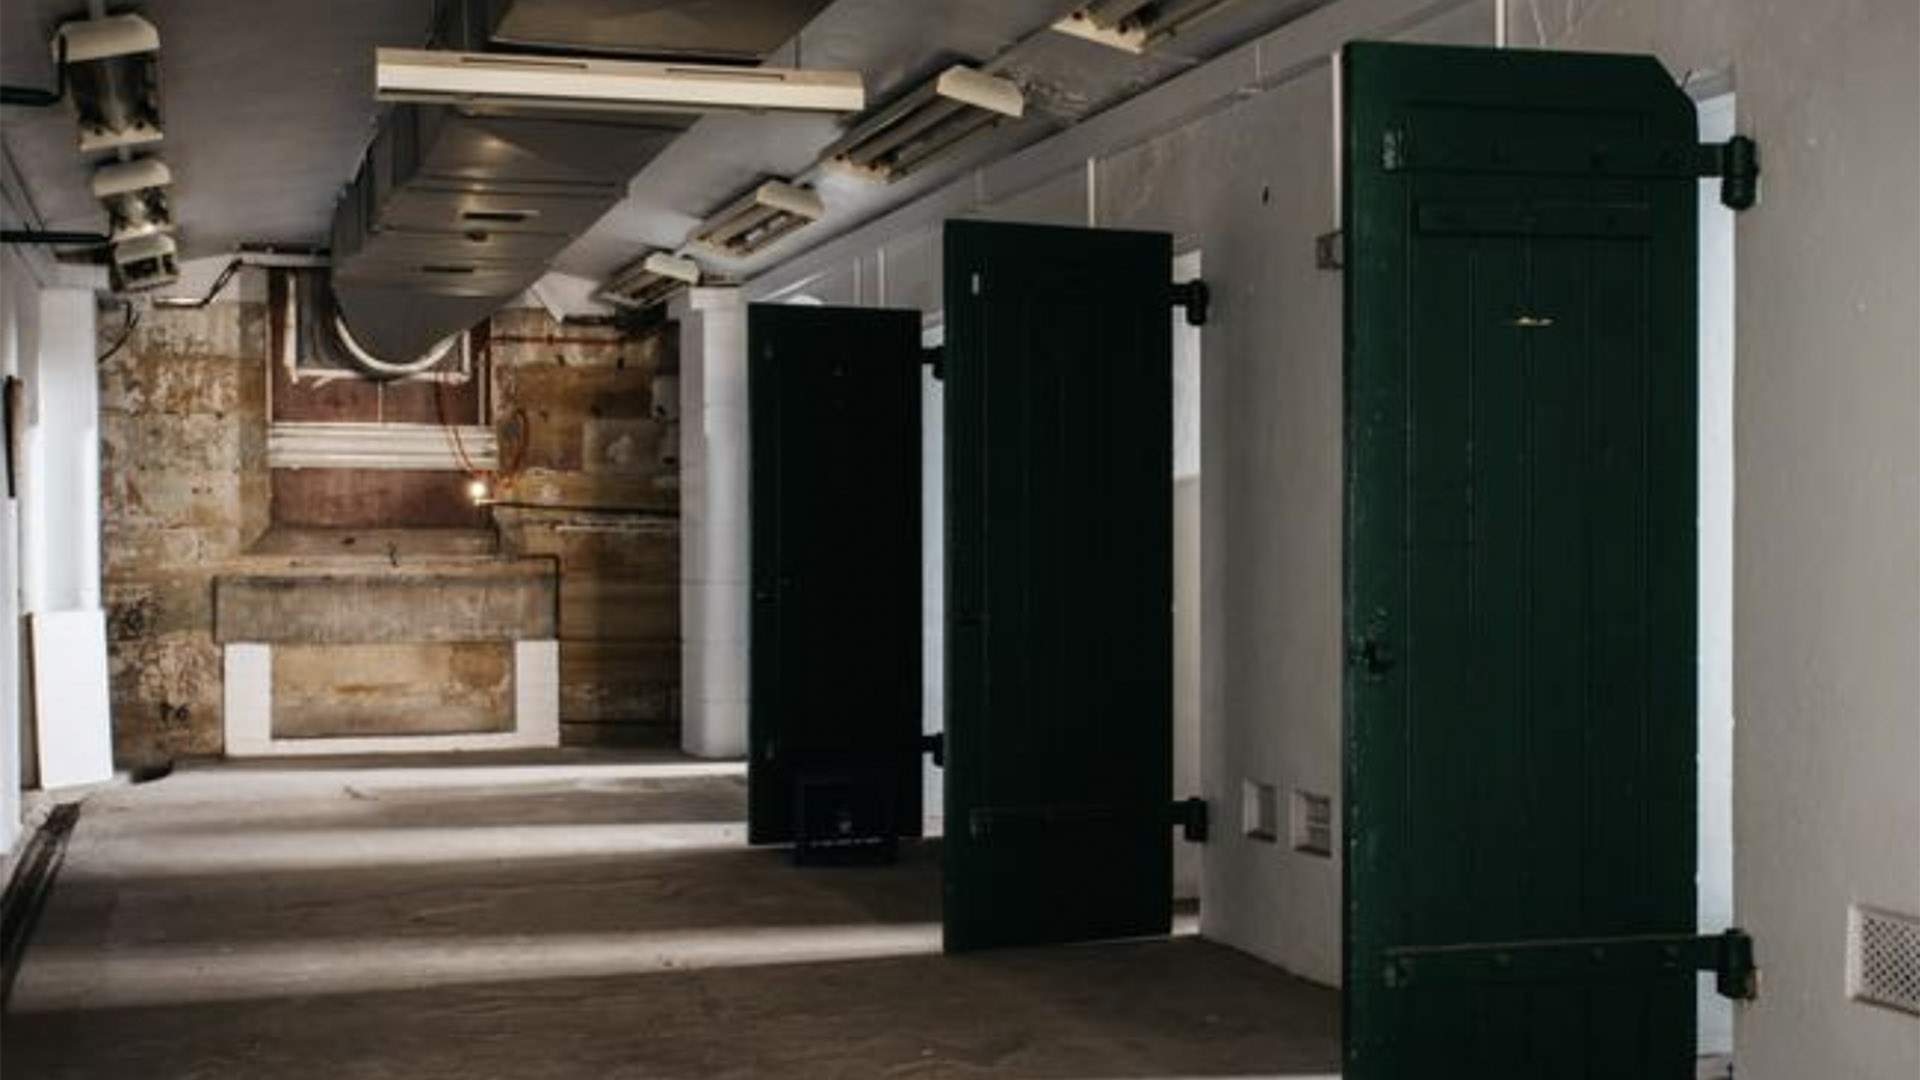 Parramatta Gaol Is Turning Into a Cinema Again for the Ultimate 'Scream' Scary Movie Session